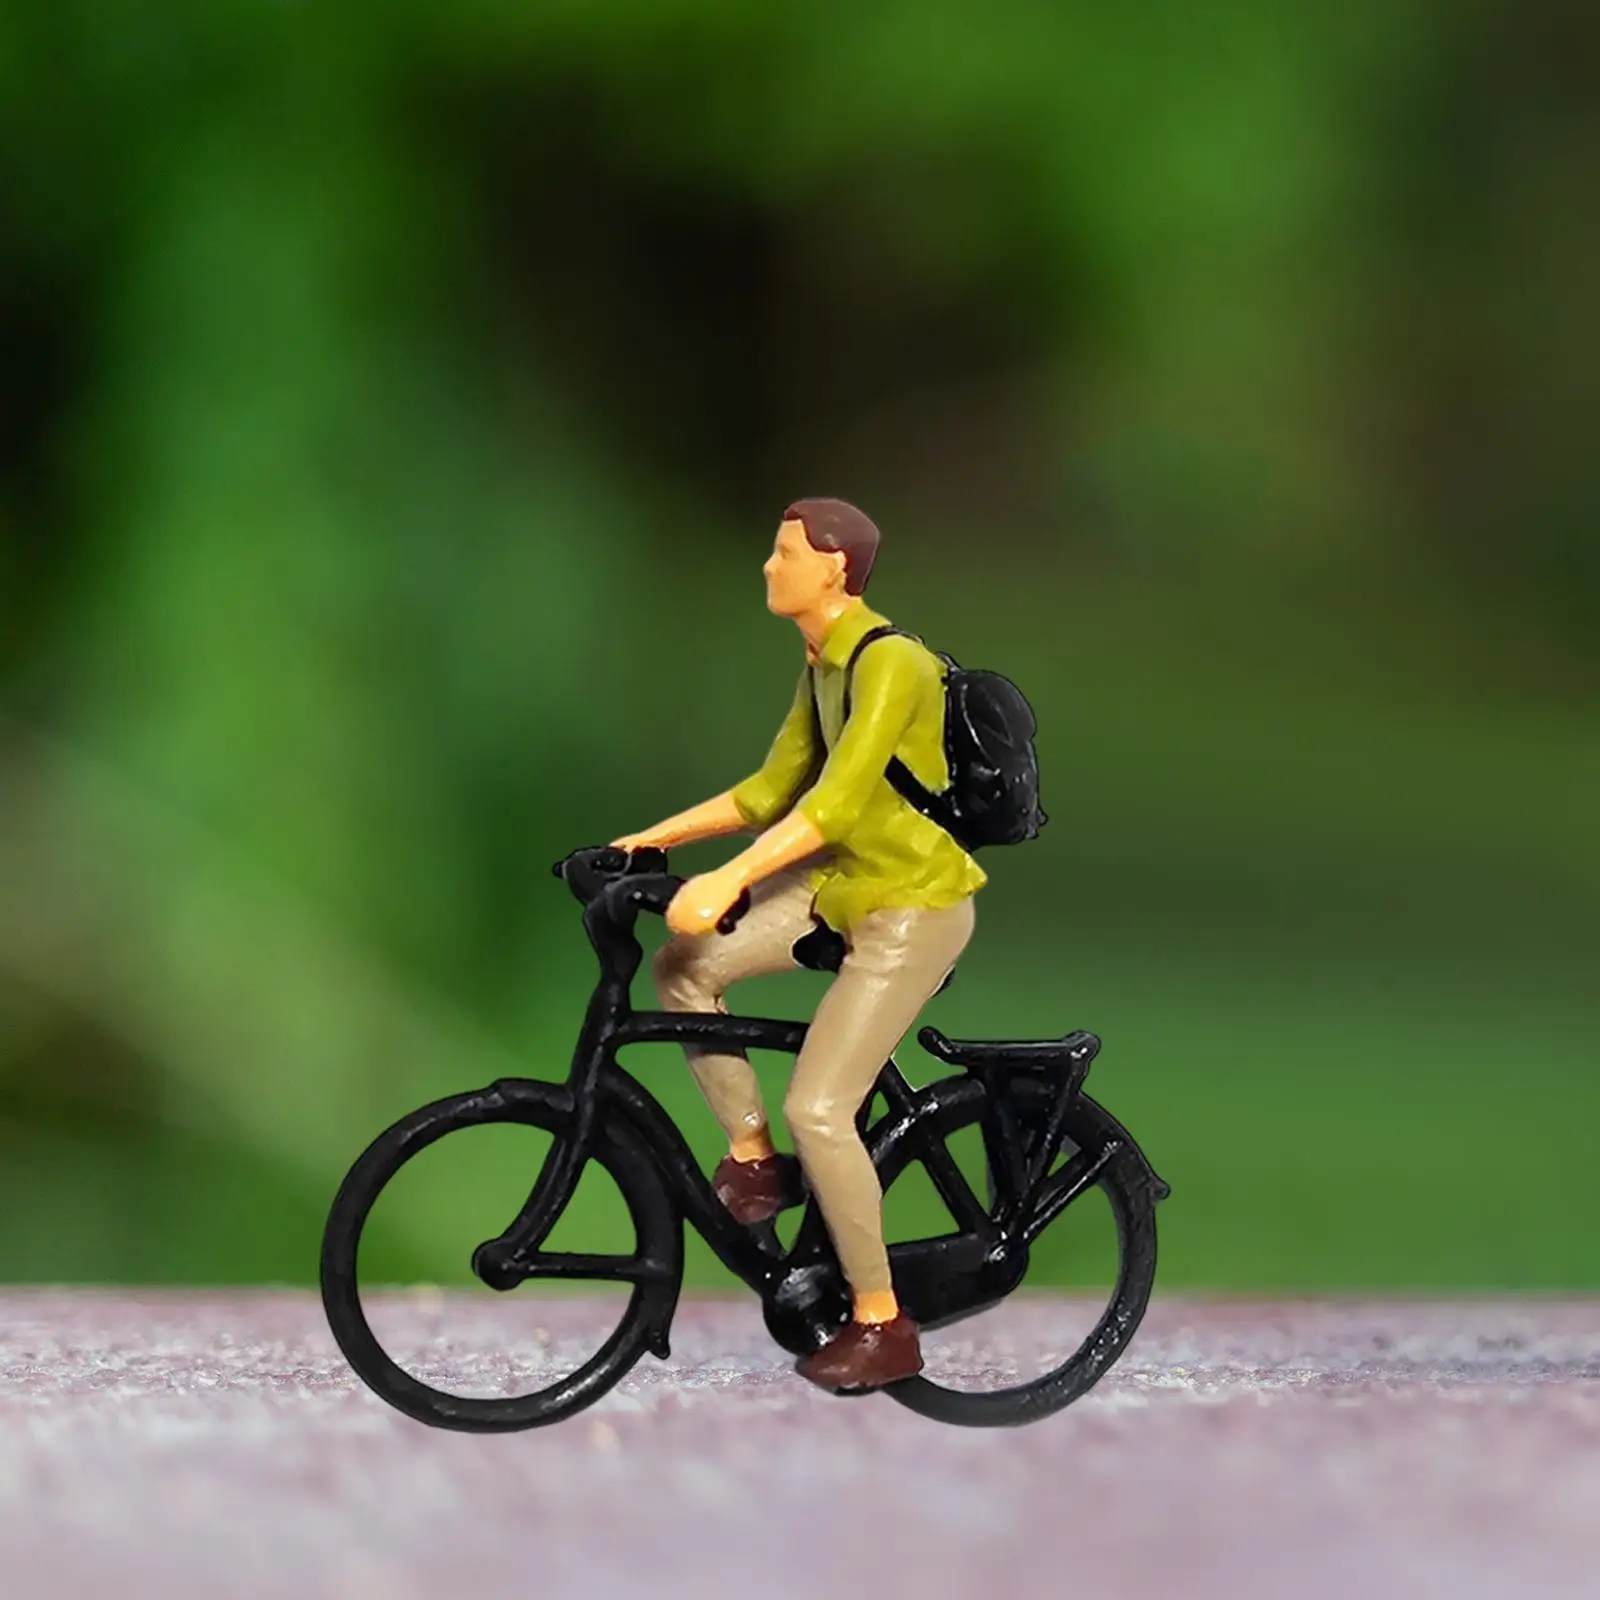 1/87 Scale Cyclist Figures Tiny People for Cycling Scene Diorama Layout